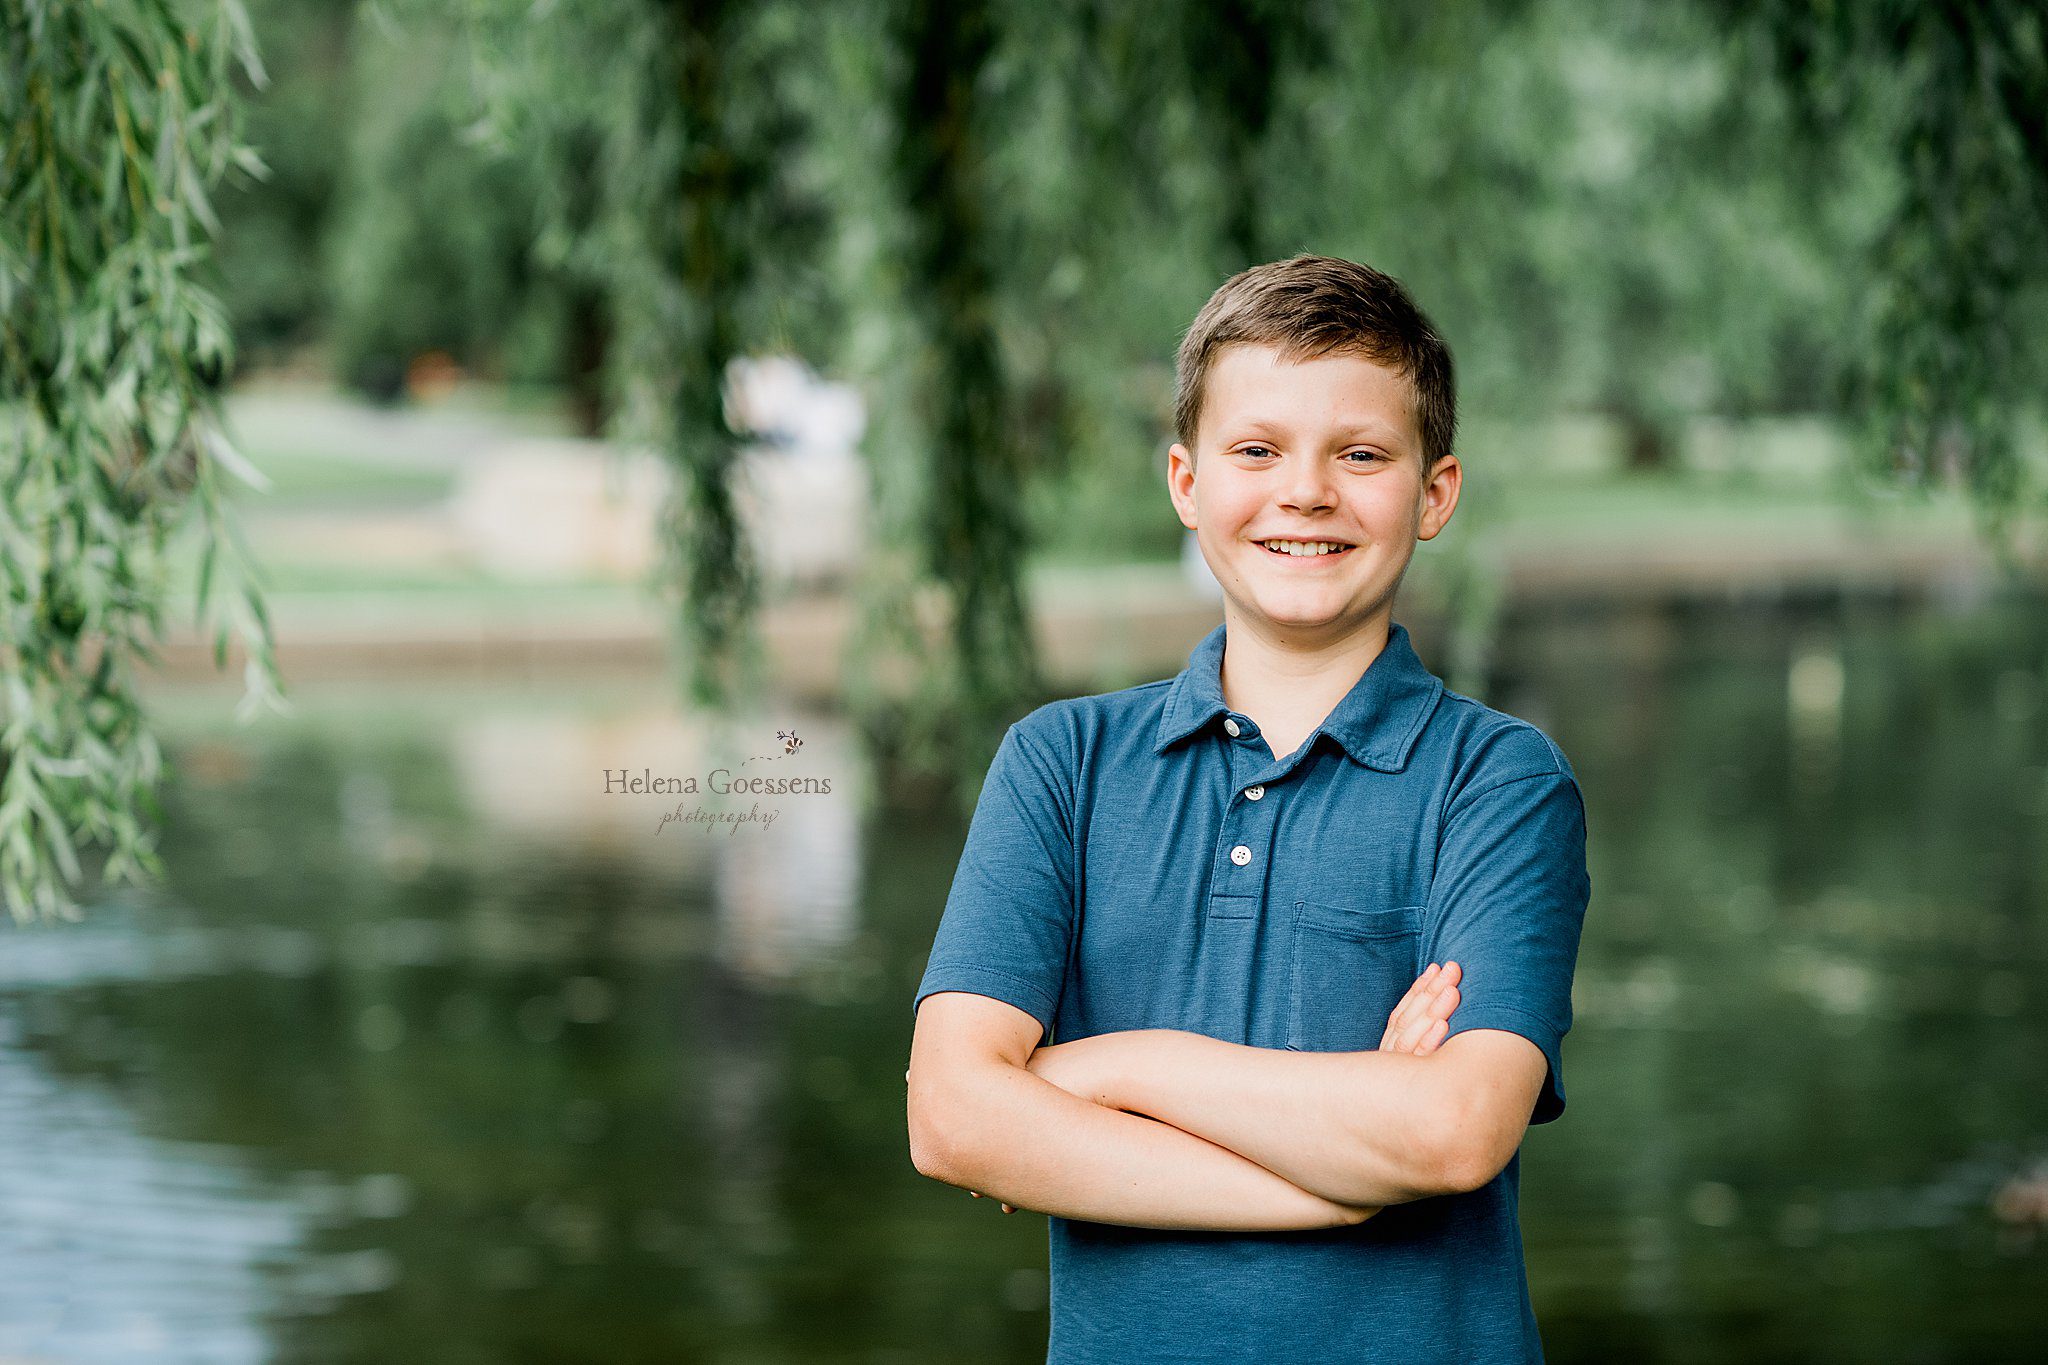 oldest son stands wearing blue polo in Boston Public Garden photographed by Helena Goessens Photography